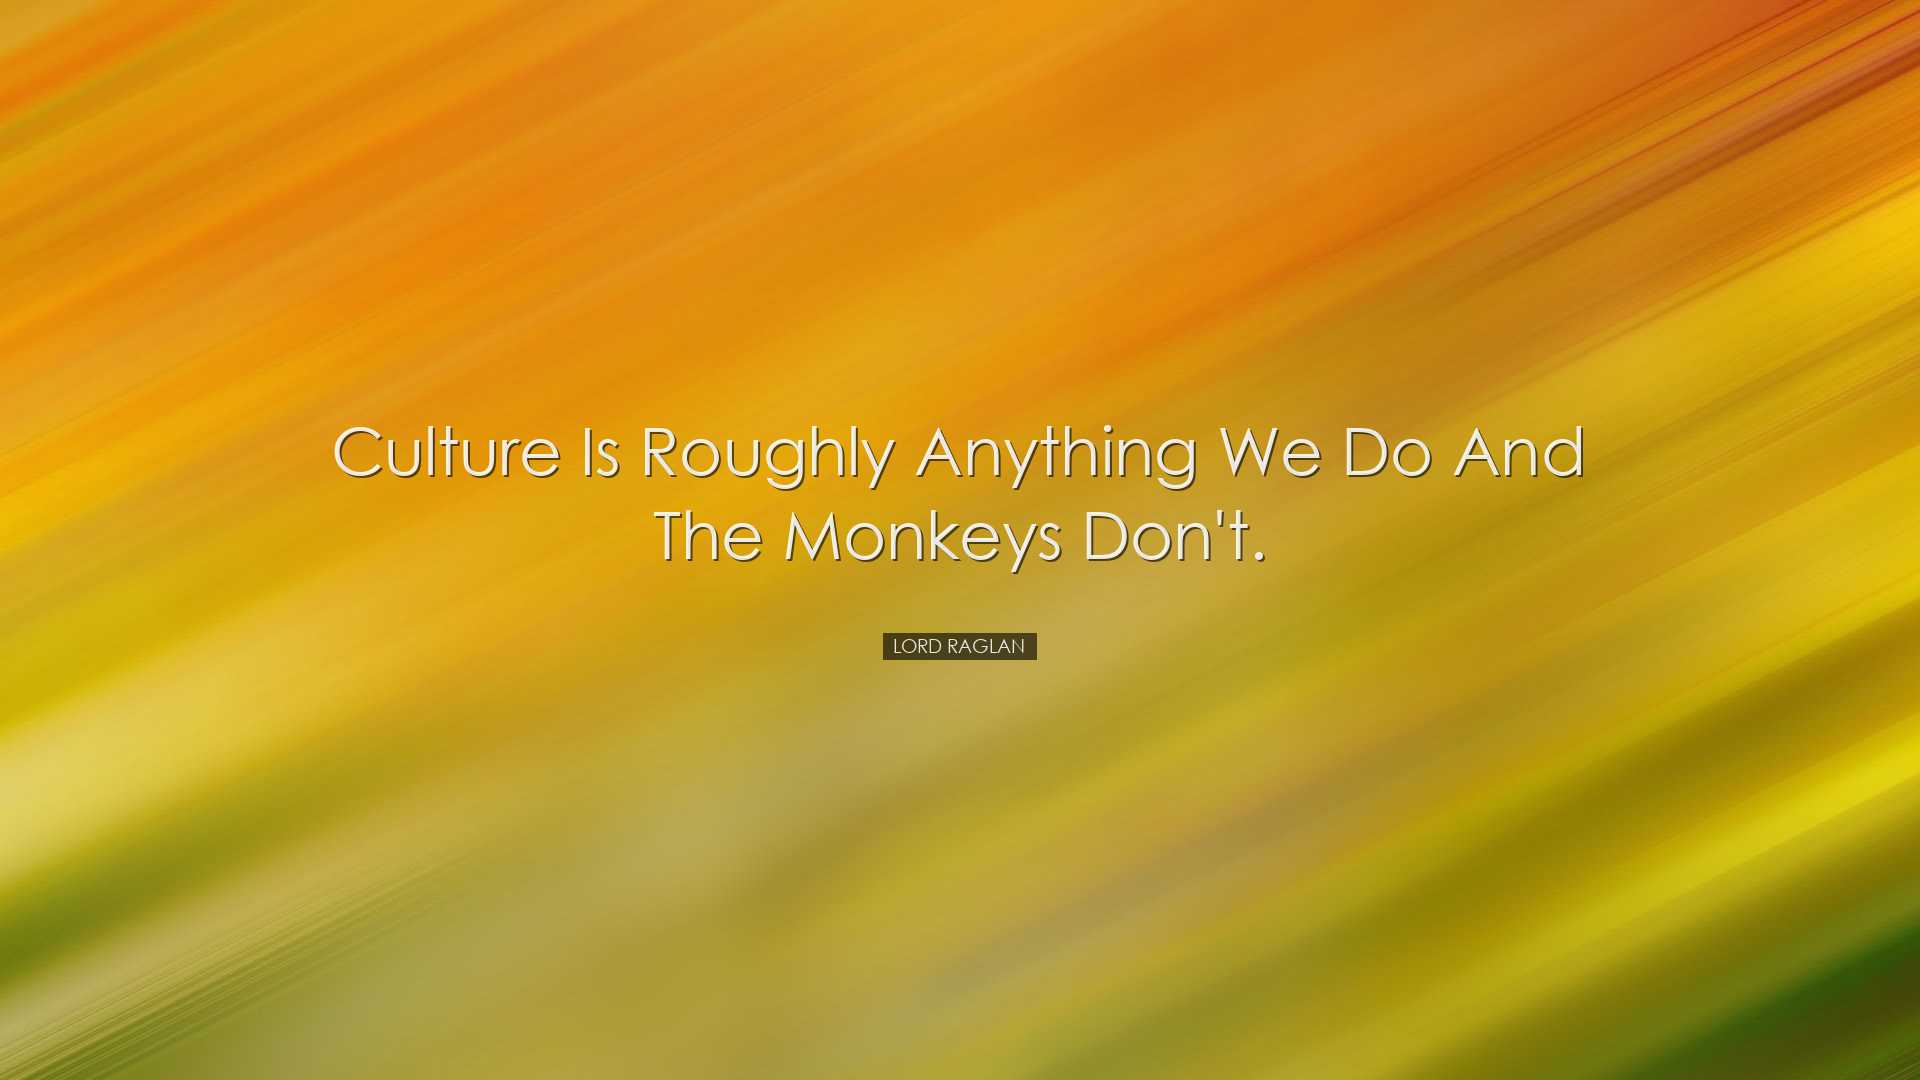 Culture is roughly anything we do and the monkeys don't. - Lord Ra